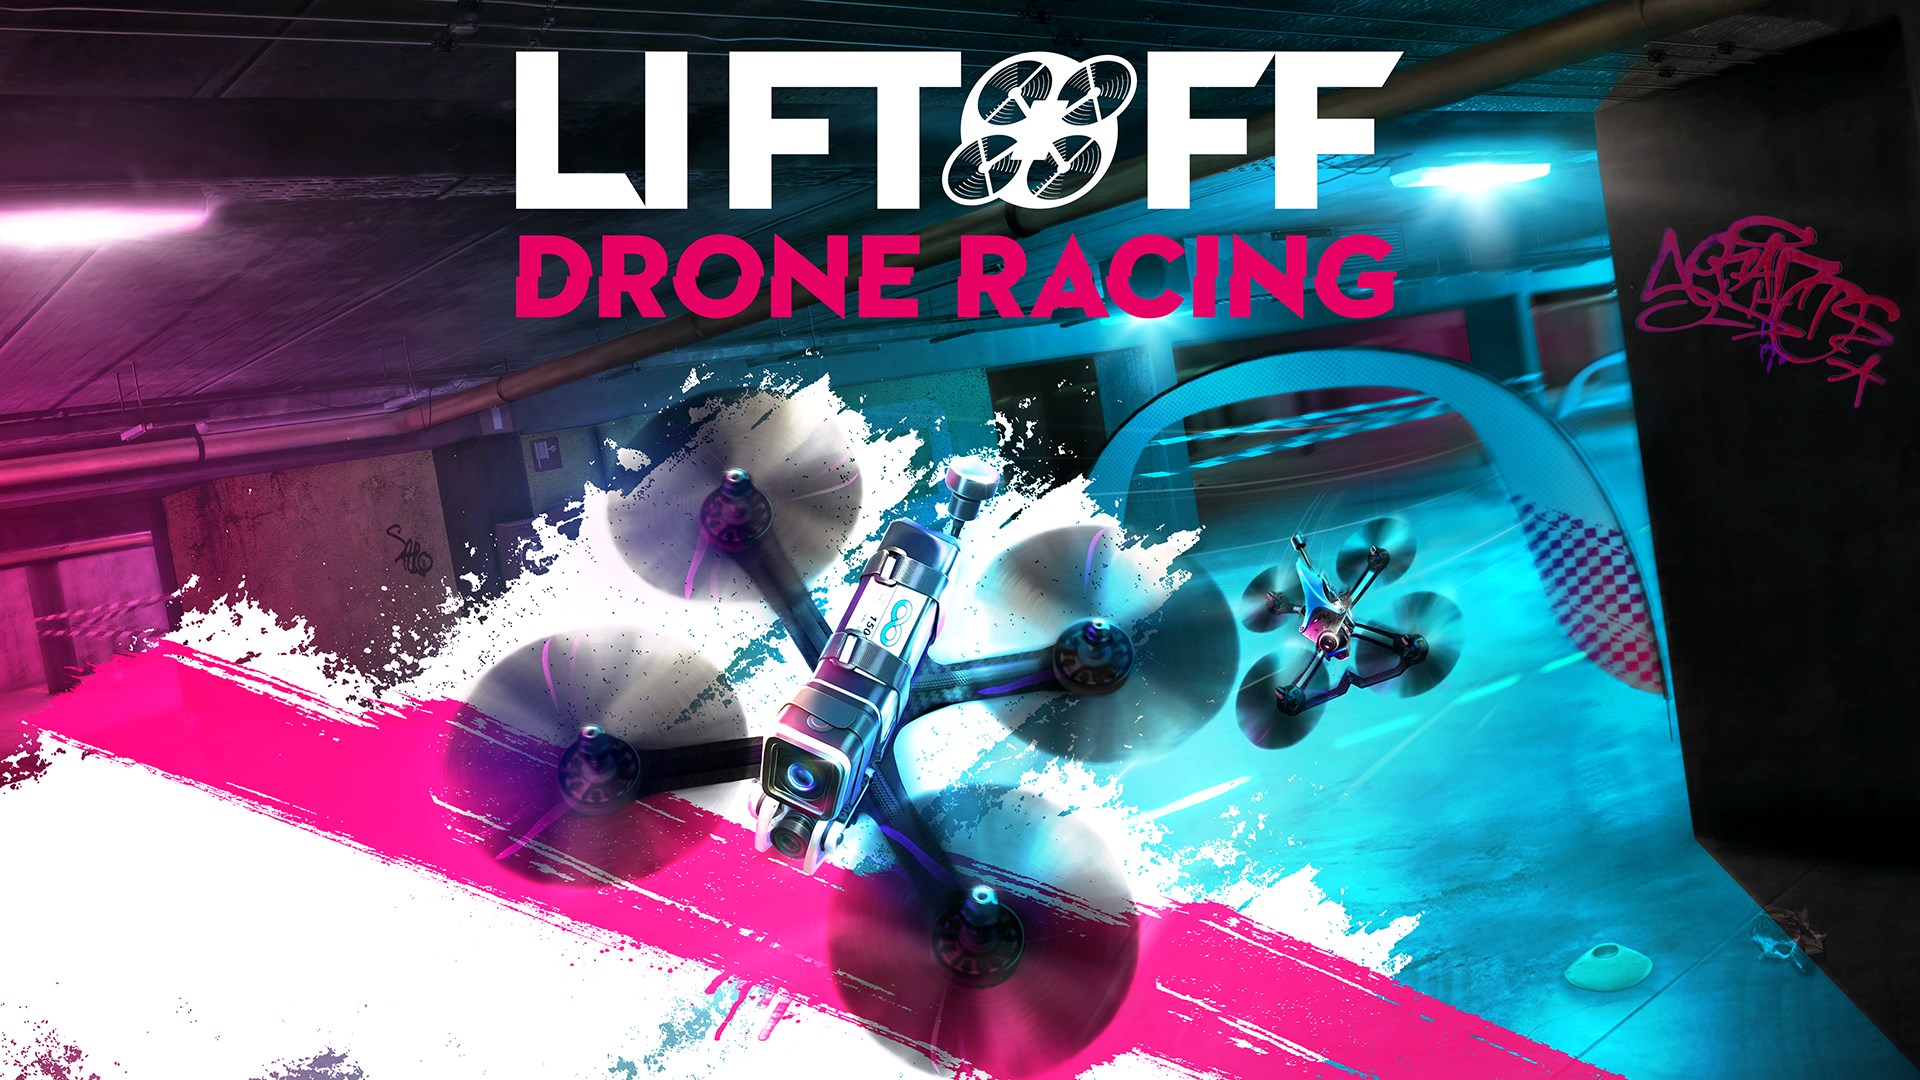 Liftoff: Drone Racing Is Now Available For Xbox One And Xbox Series
X|S